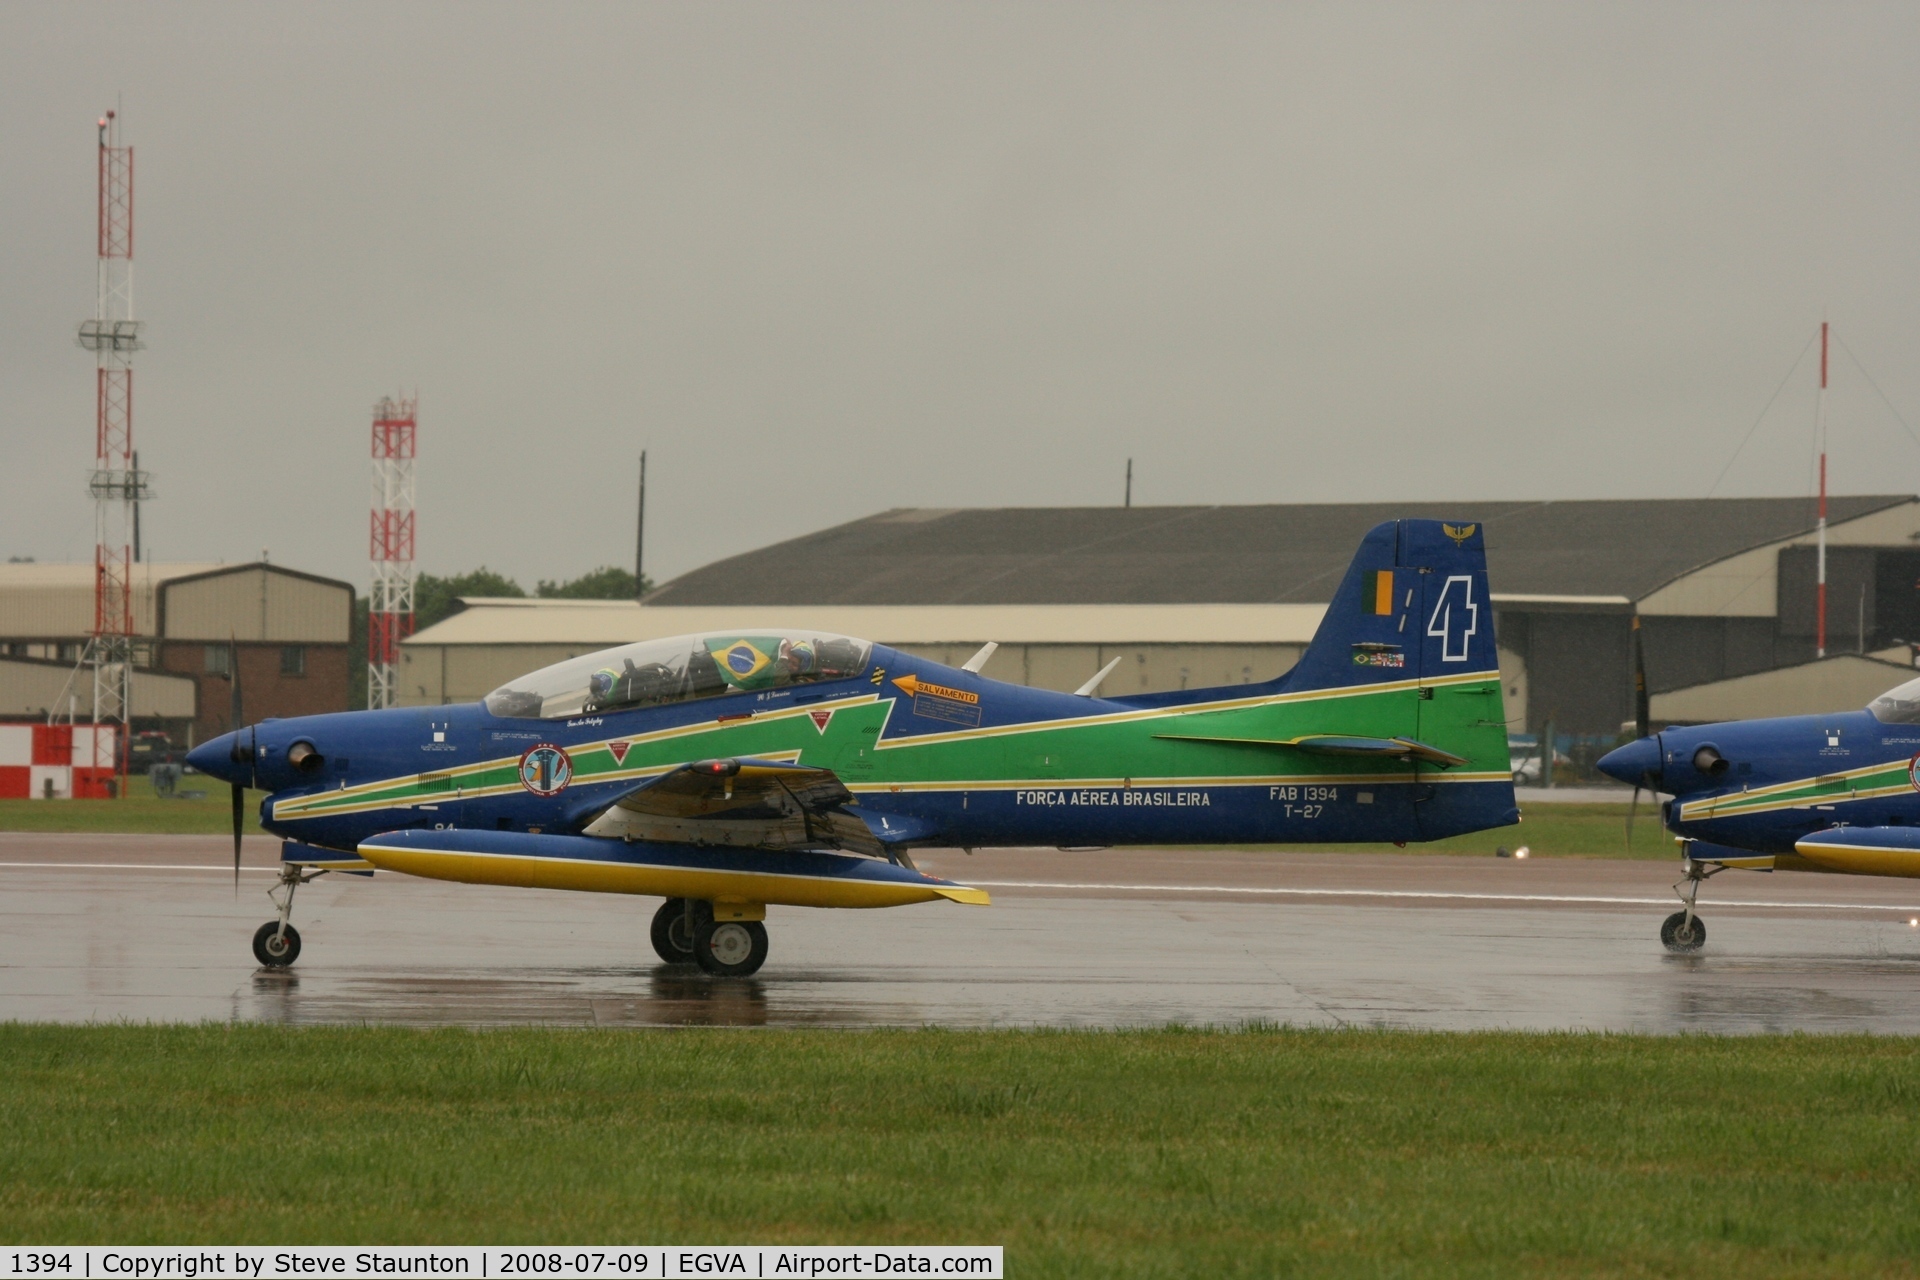 1394, Embraer T-27 Tucano (EMB-312) C/N 312145, Taken at the Royal International Air Tattoo 2008 during arrivals and departures (show days cancelled due to bad weather)